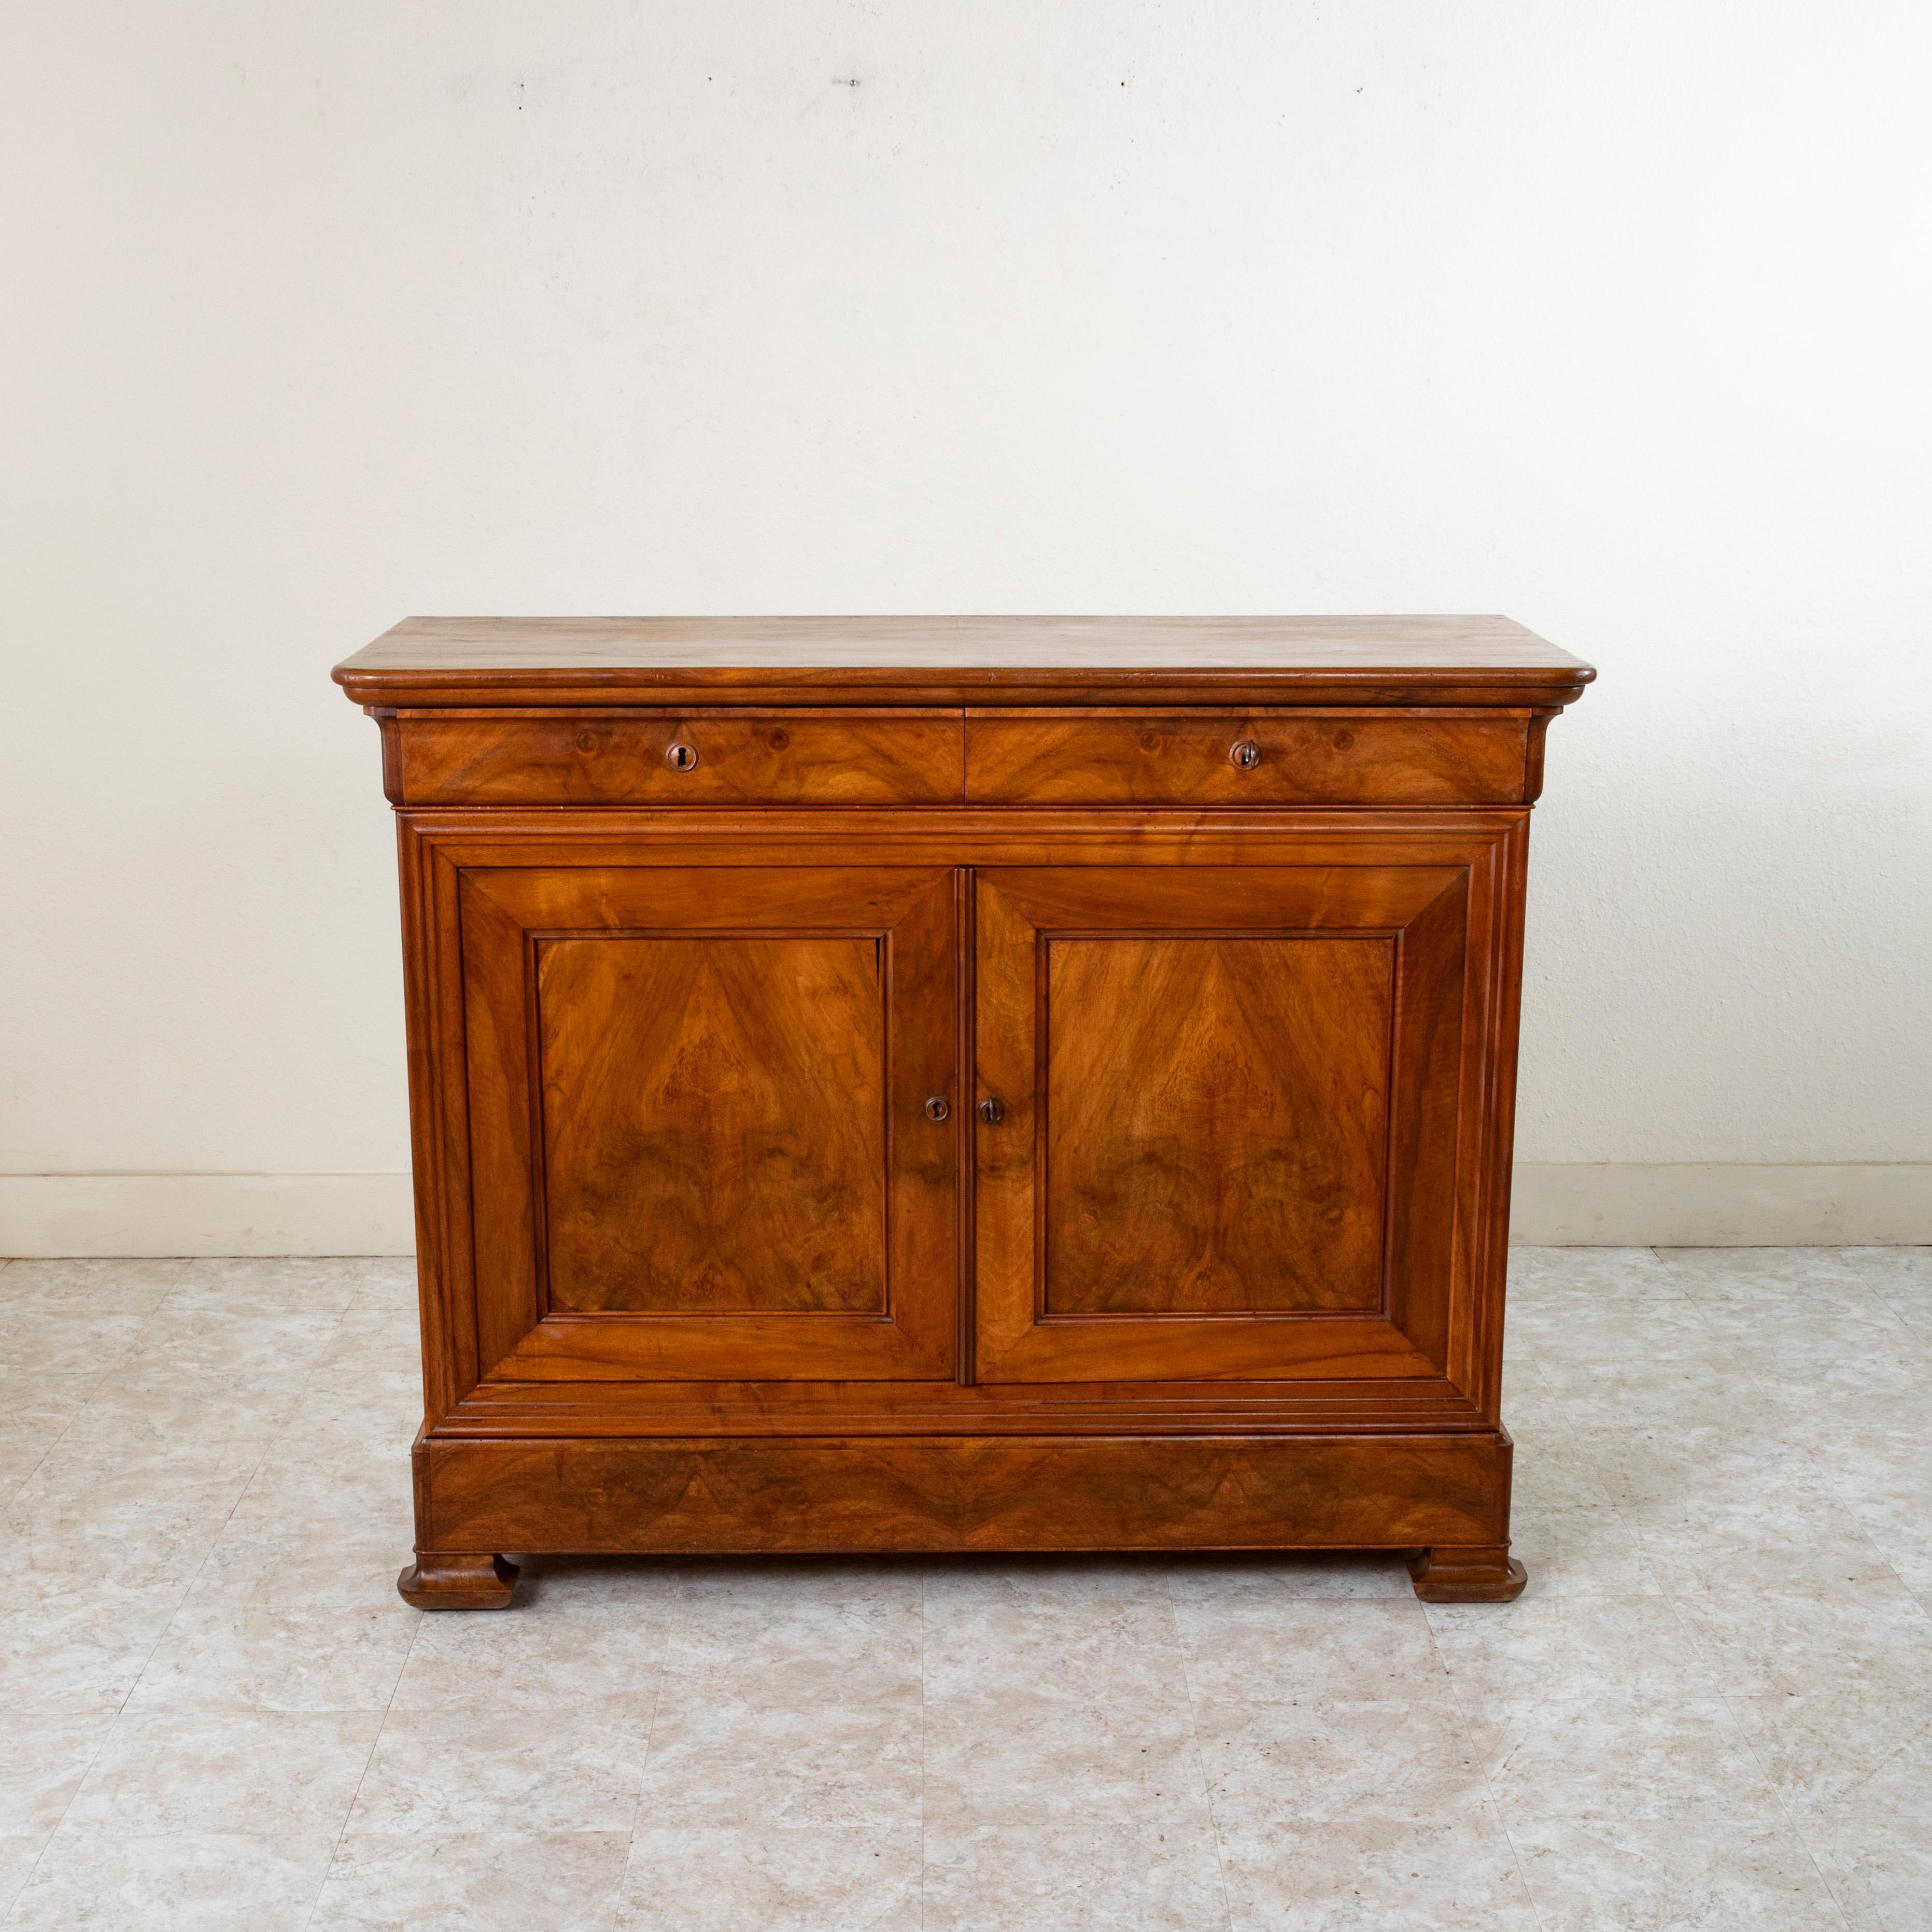 This Louis Philippe period buffet from the nineteenth century is known as a buffet d'appui in French which translates 